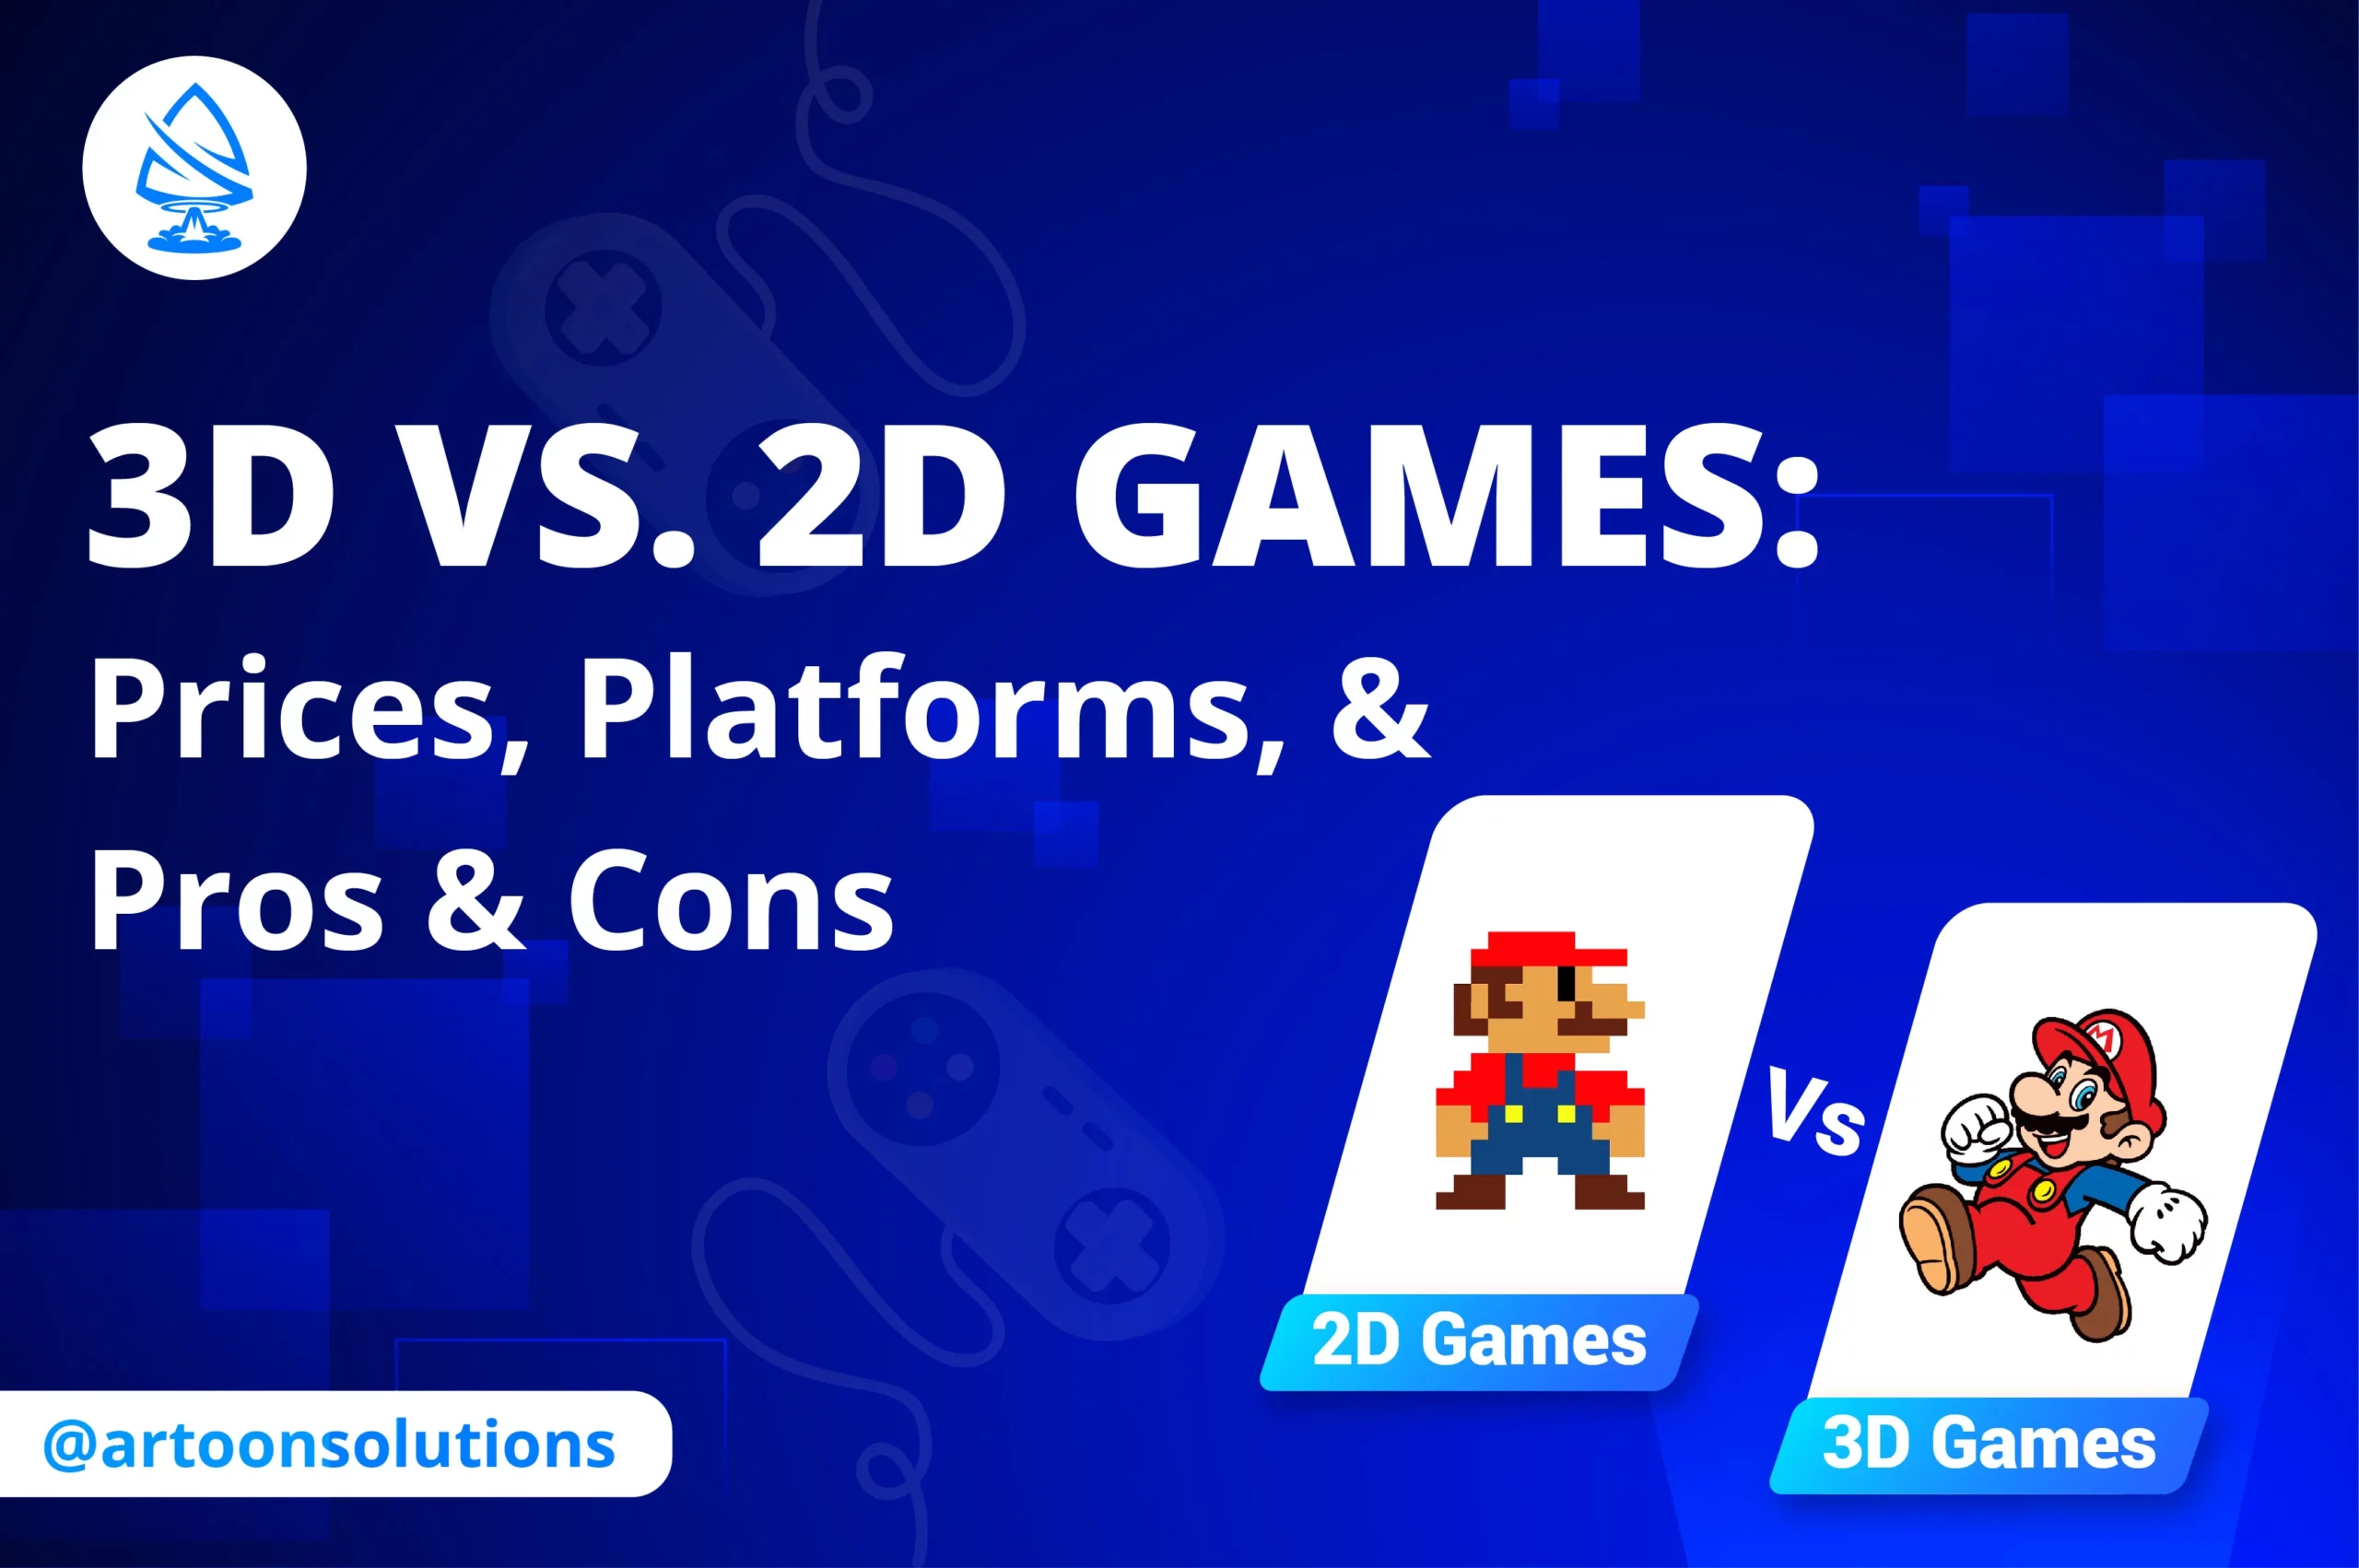 3D vs. 2D Games: Prices, Platforms, and Pros & Cons